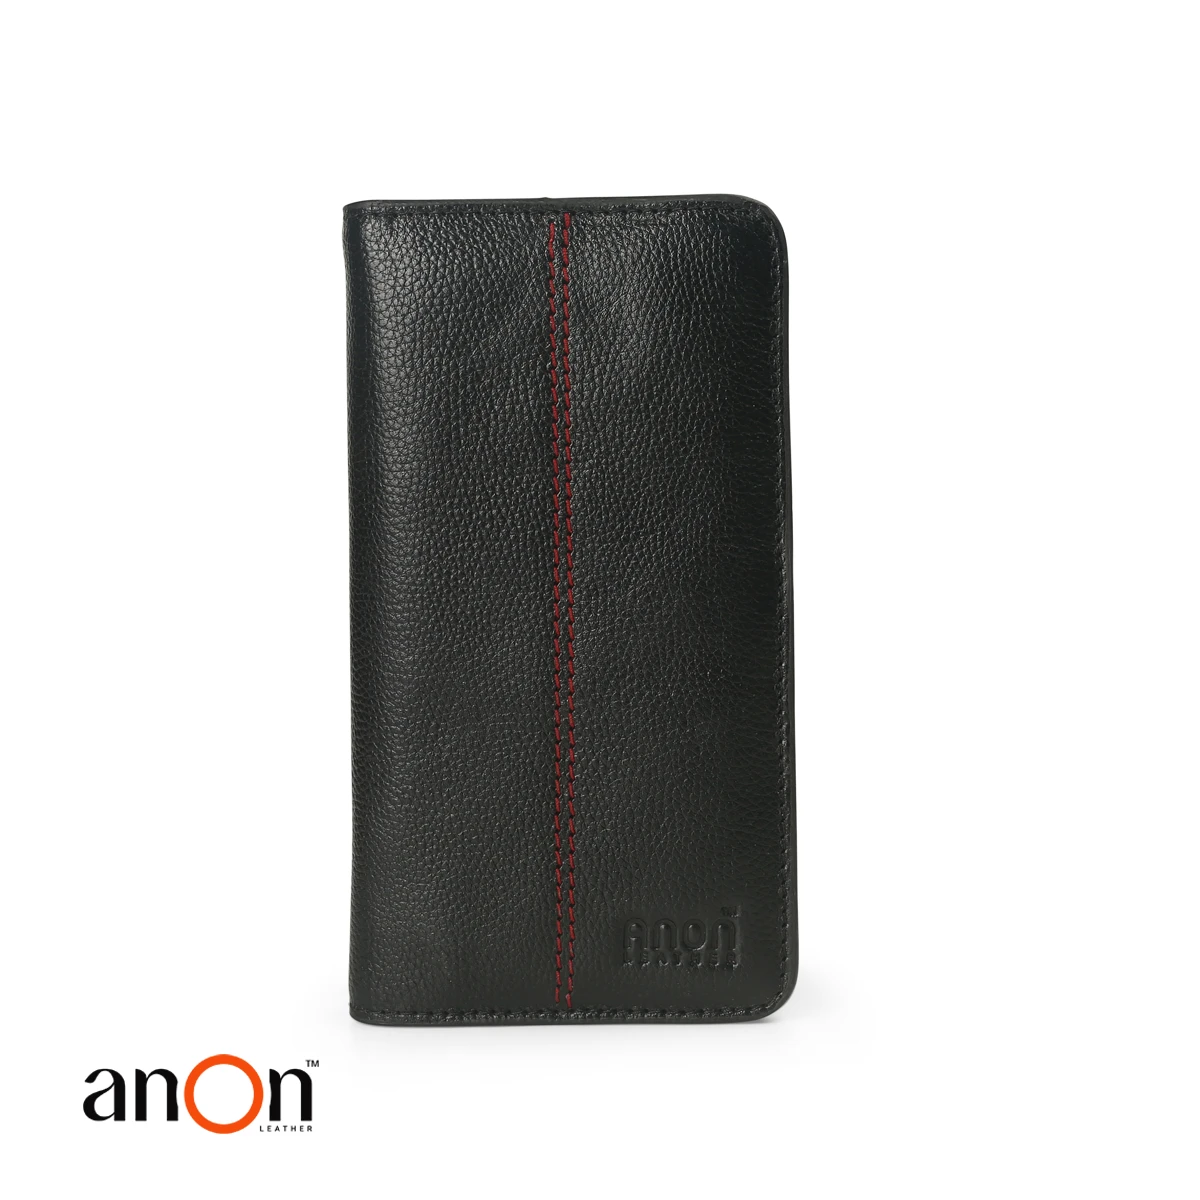 ANON Leather Long Wallet LW104